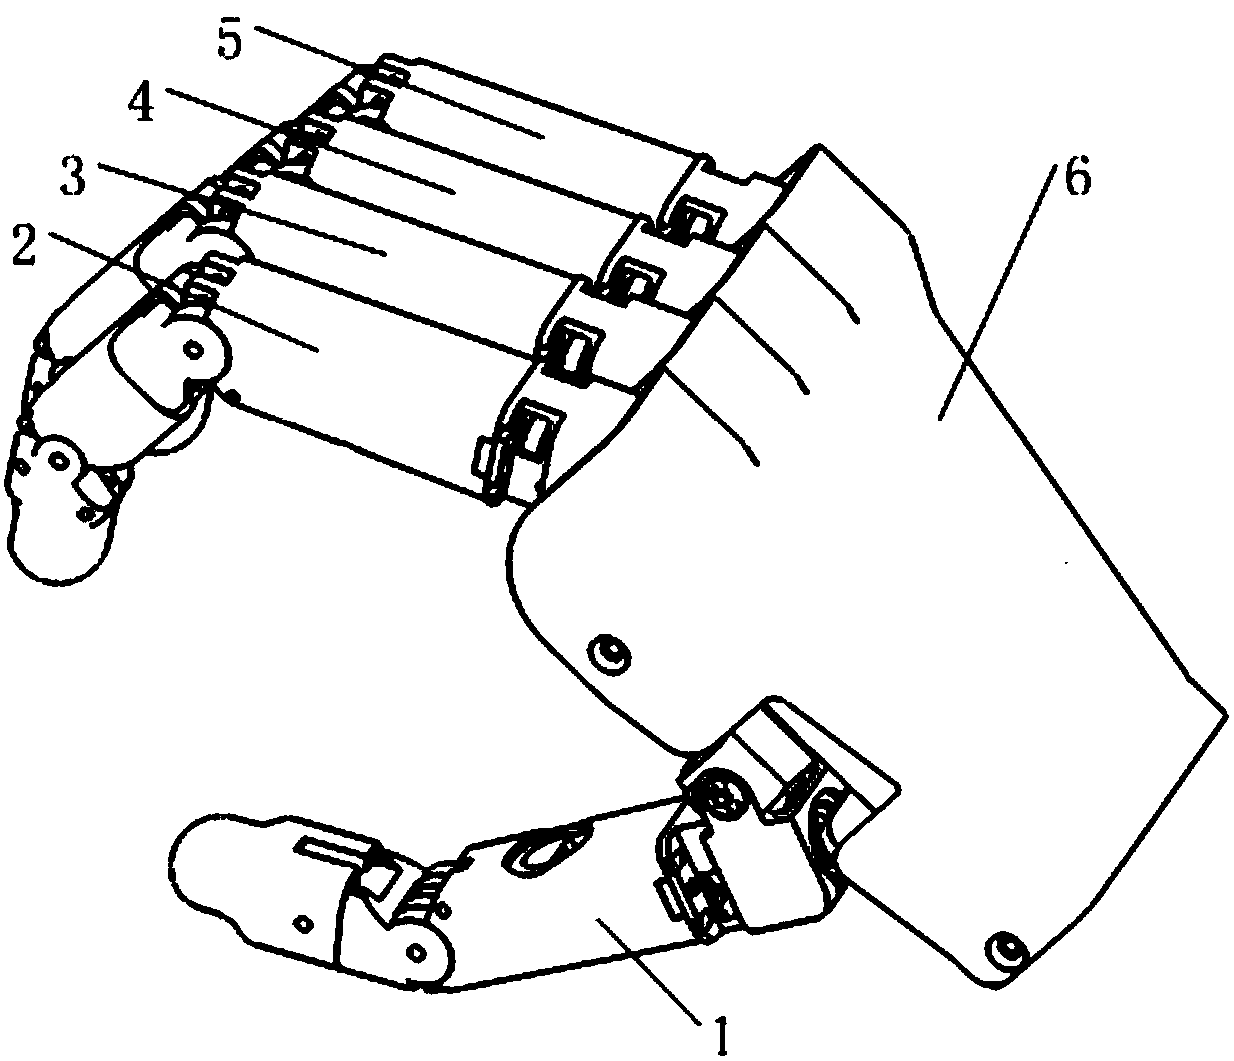 Underactuated lightweight human-simulated five-finger dexterous hand